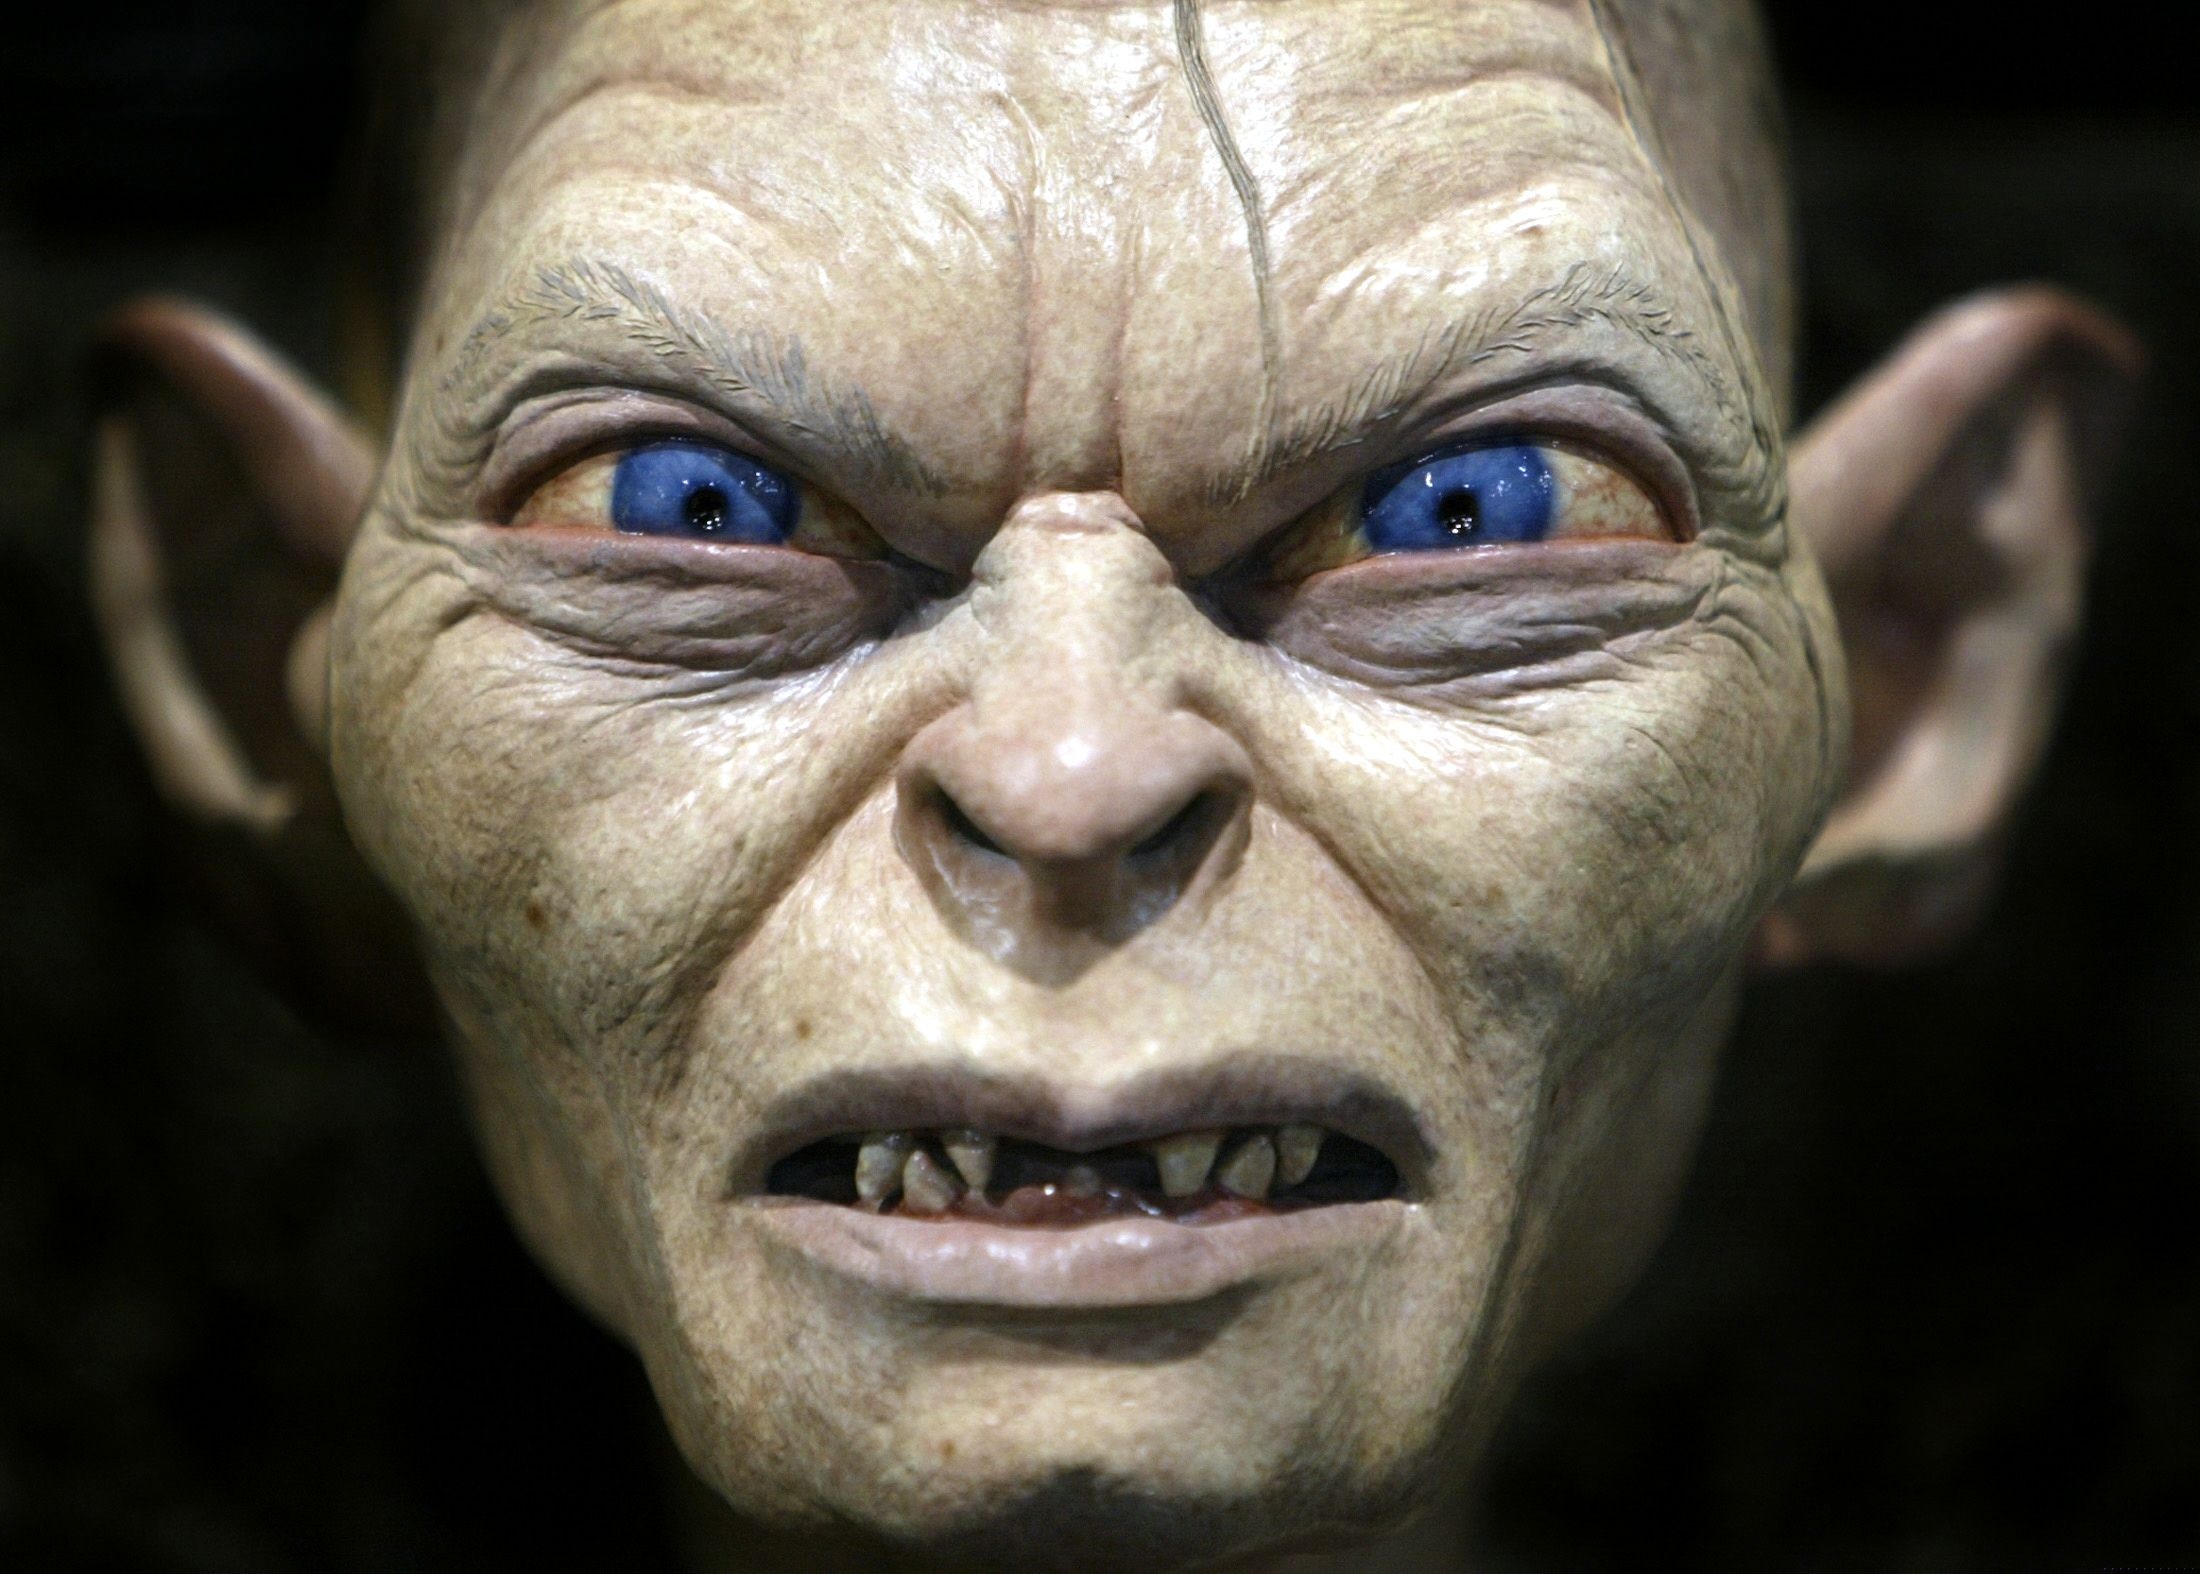 Smeagol, Lord of the Rings, High-resolution wallpapers, Free download, 2200x1580 HD Desktop